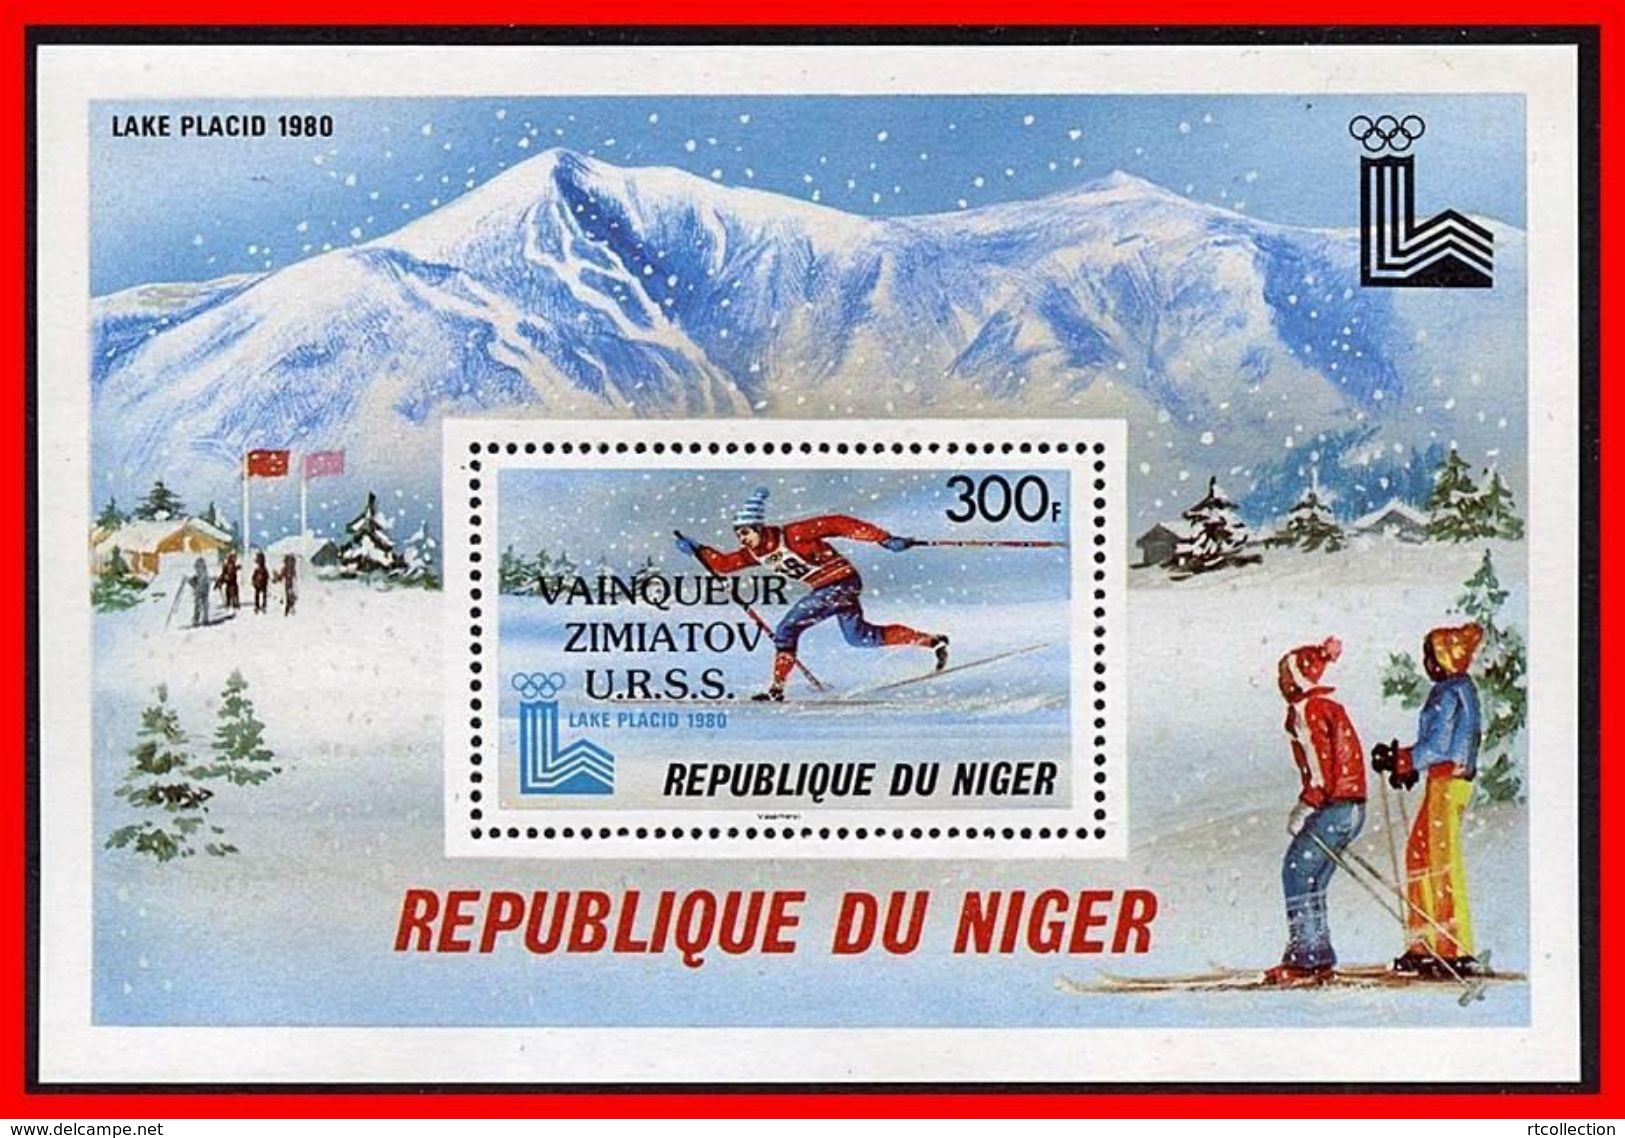 Niger 1980 Olympic Games Lake Placid USA Sports Downhill Skiing Sports Flag Flags S/S Stamp MNH Michel 705 Bl.28 - Stamps